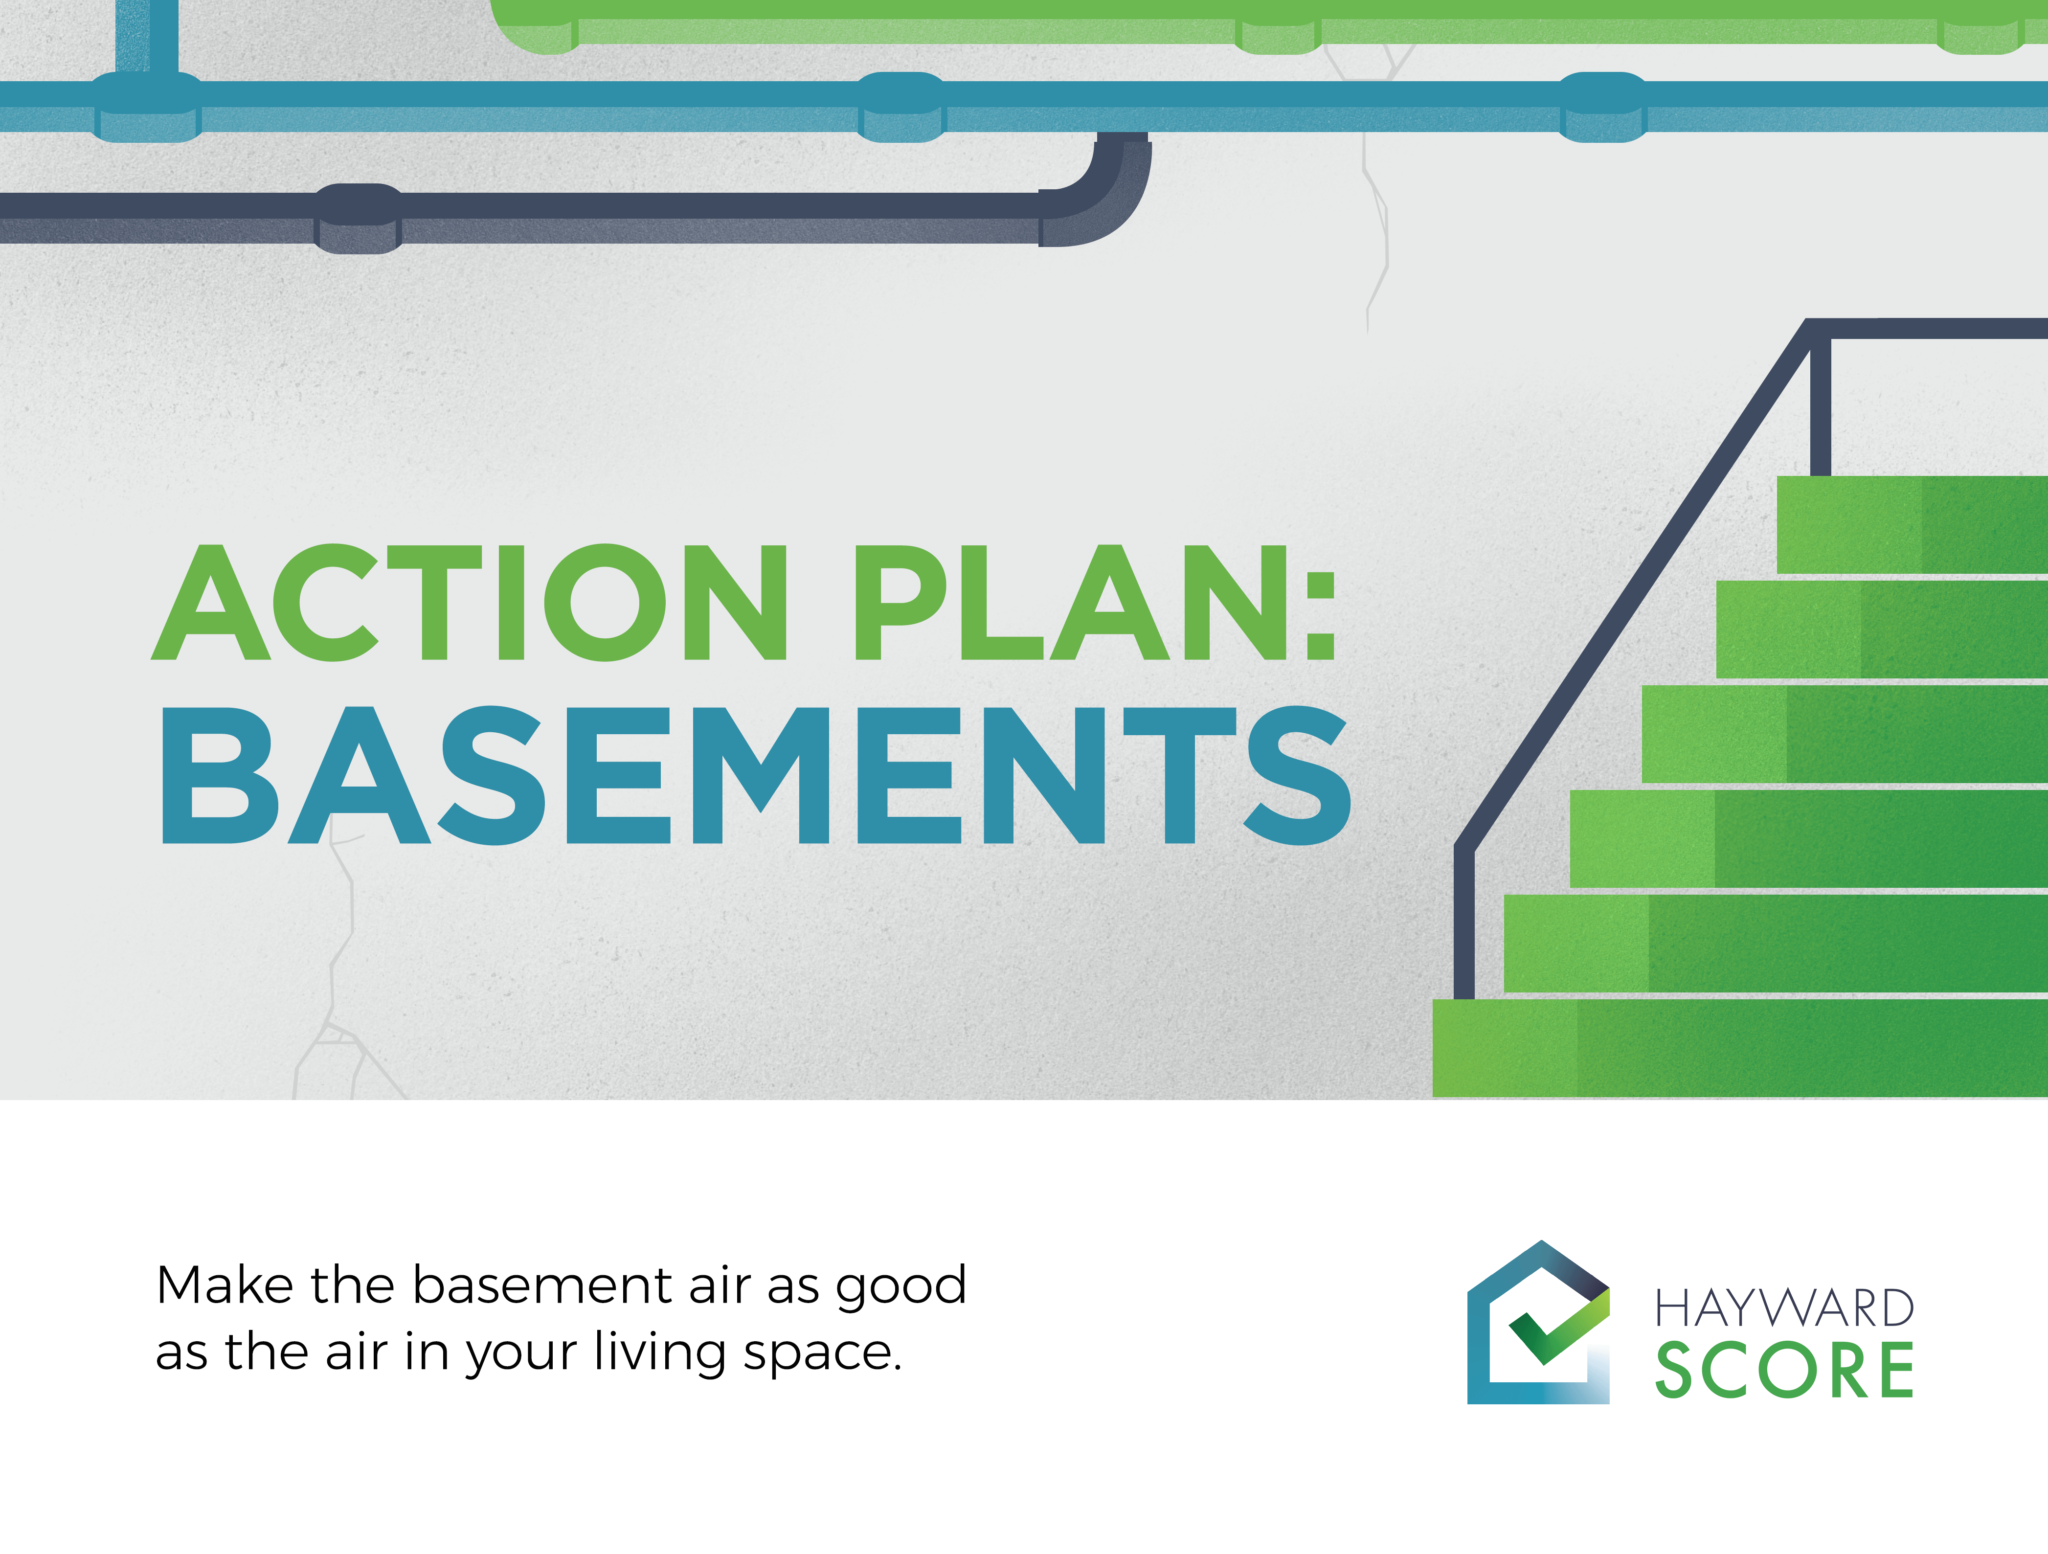 Make the basement air as good as the air in your living space.